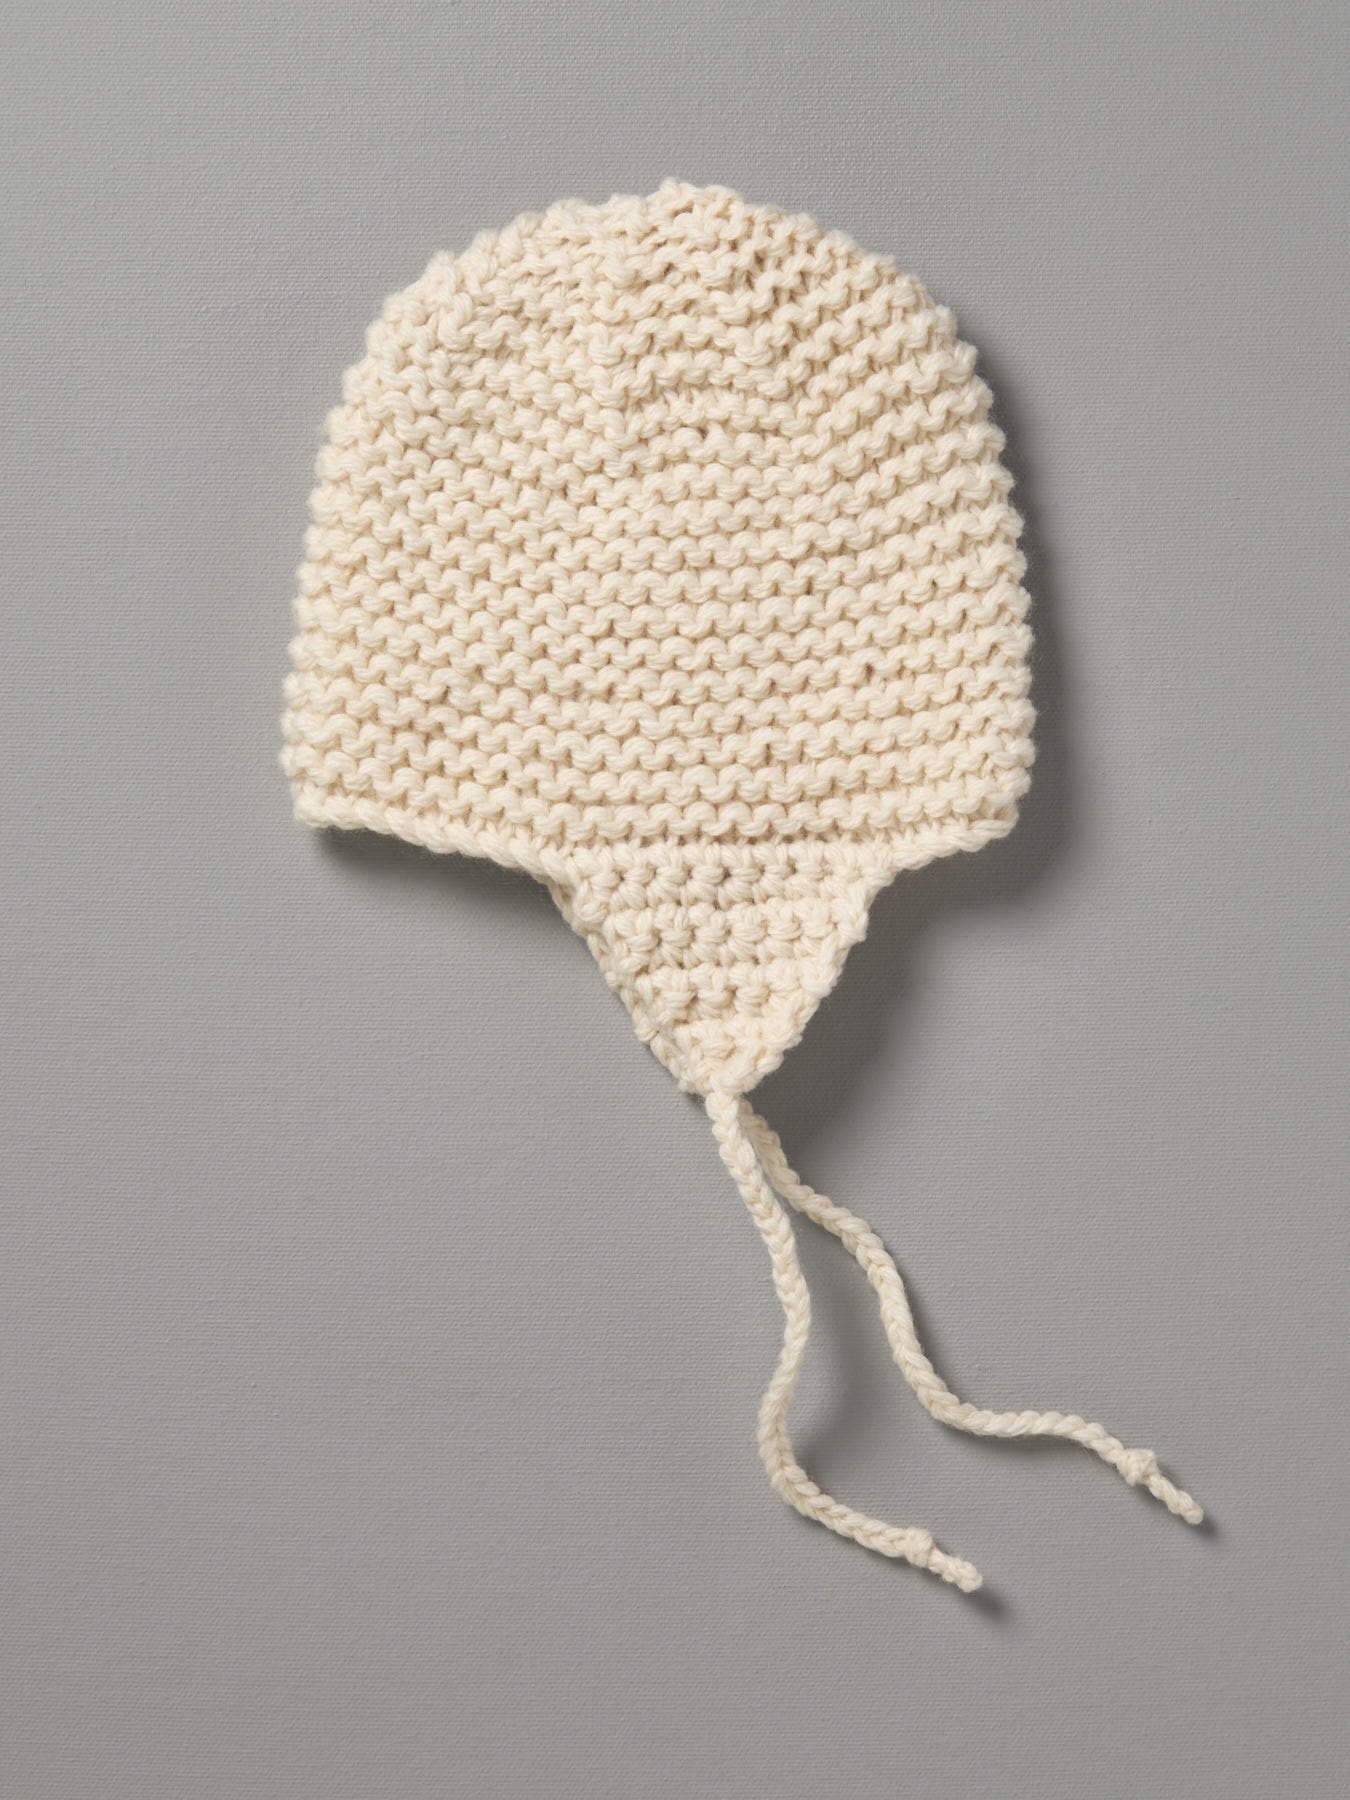 A Hand Knitted Chunky Knit Hat - Natural from Weebits on a gray background.